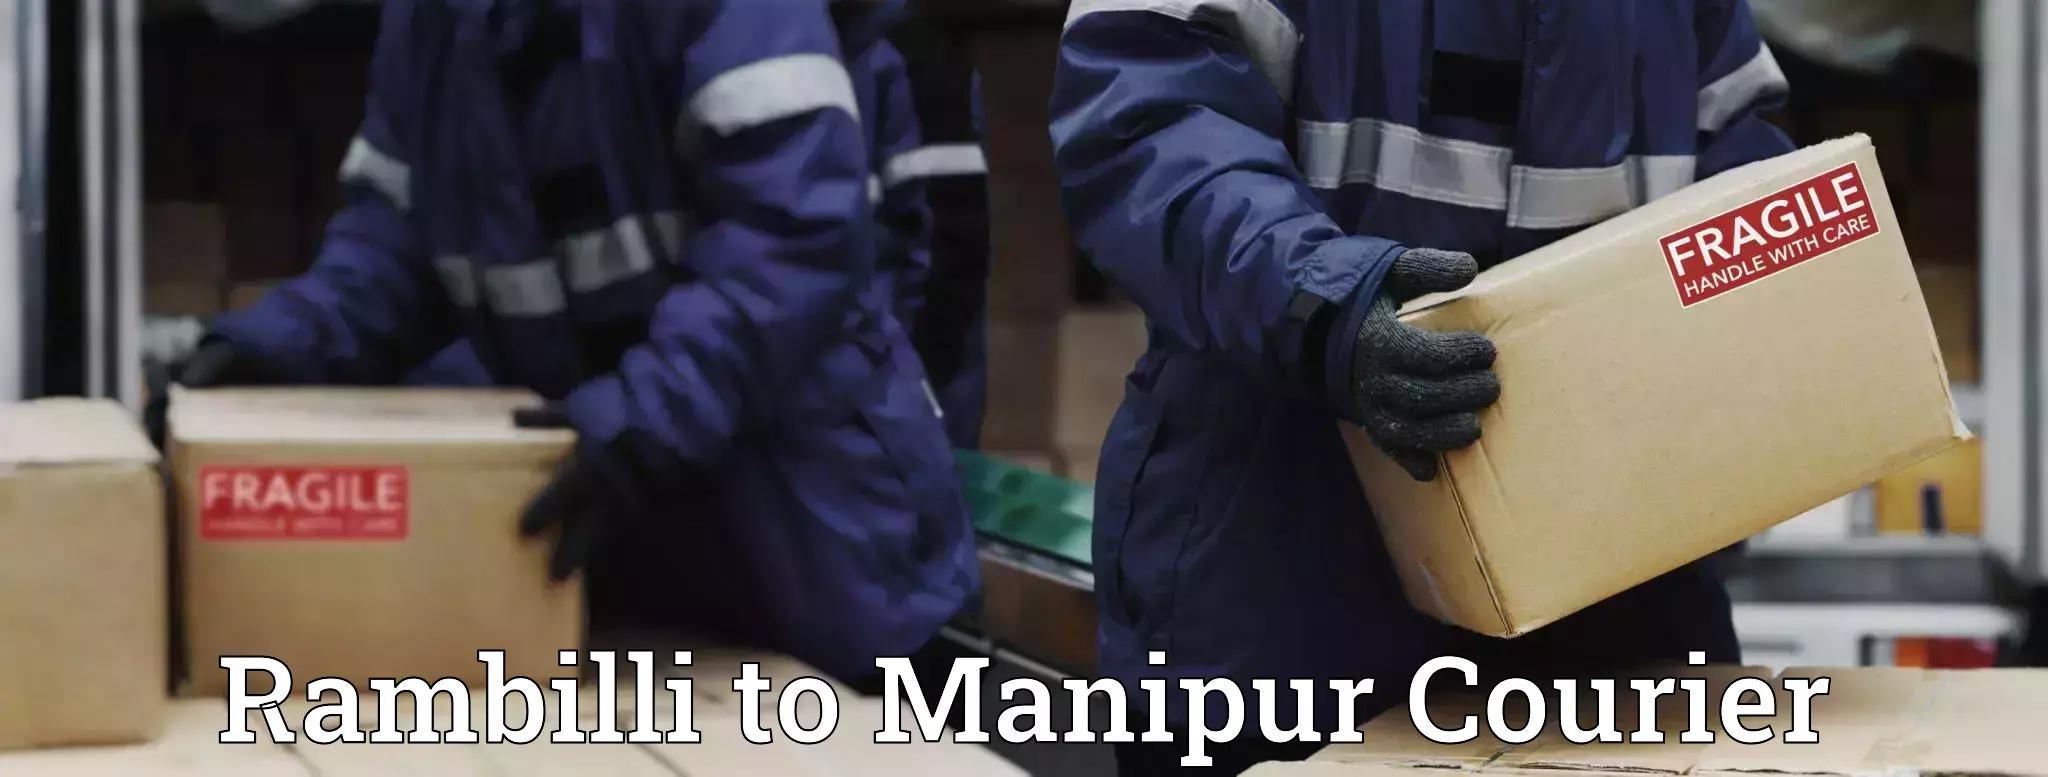 Courier app Rambilli to Manipur